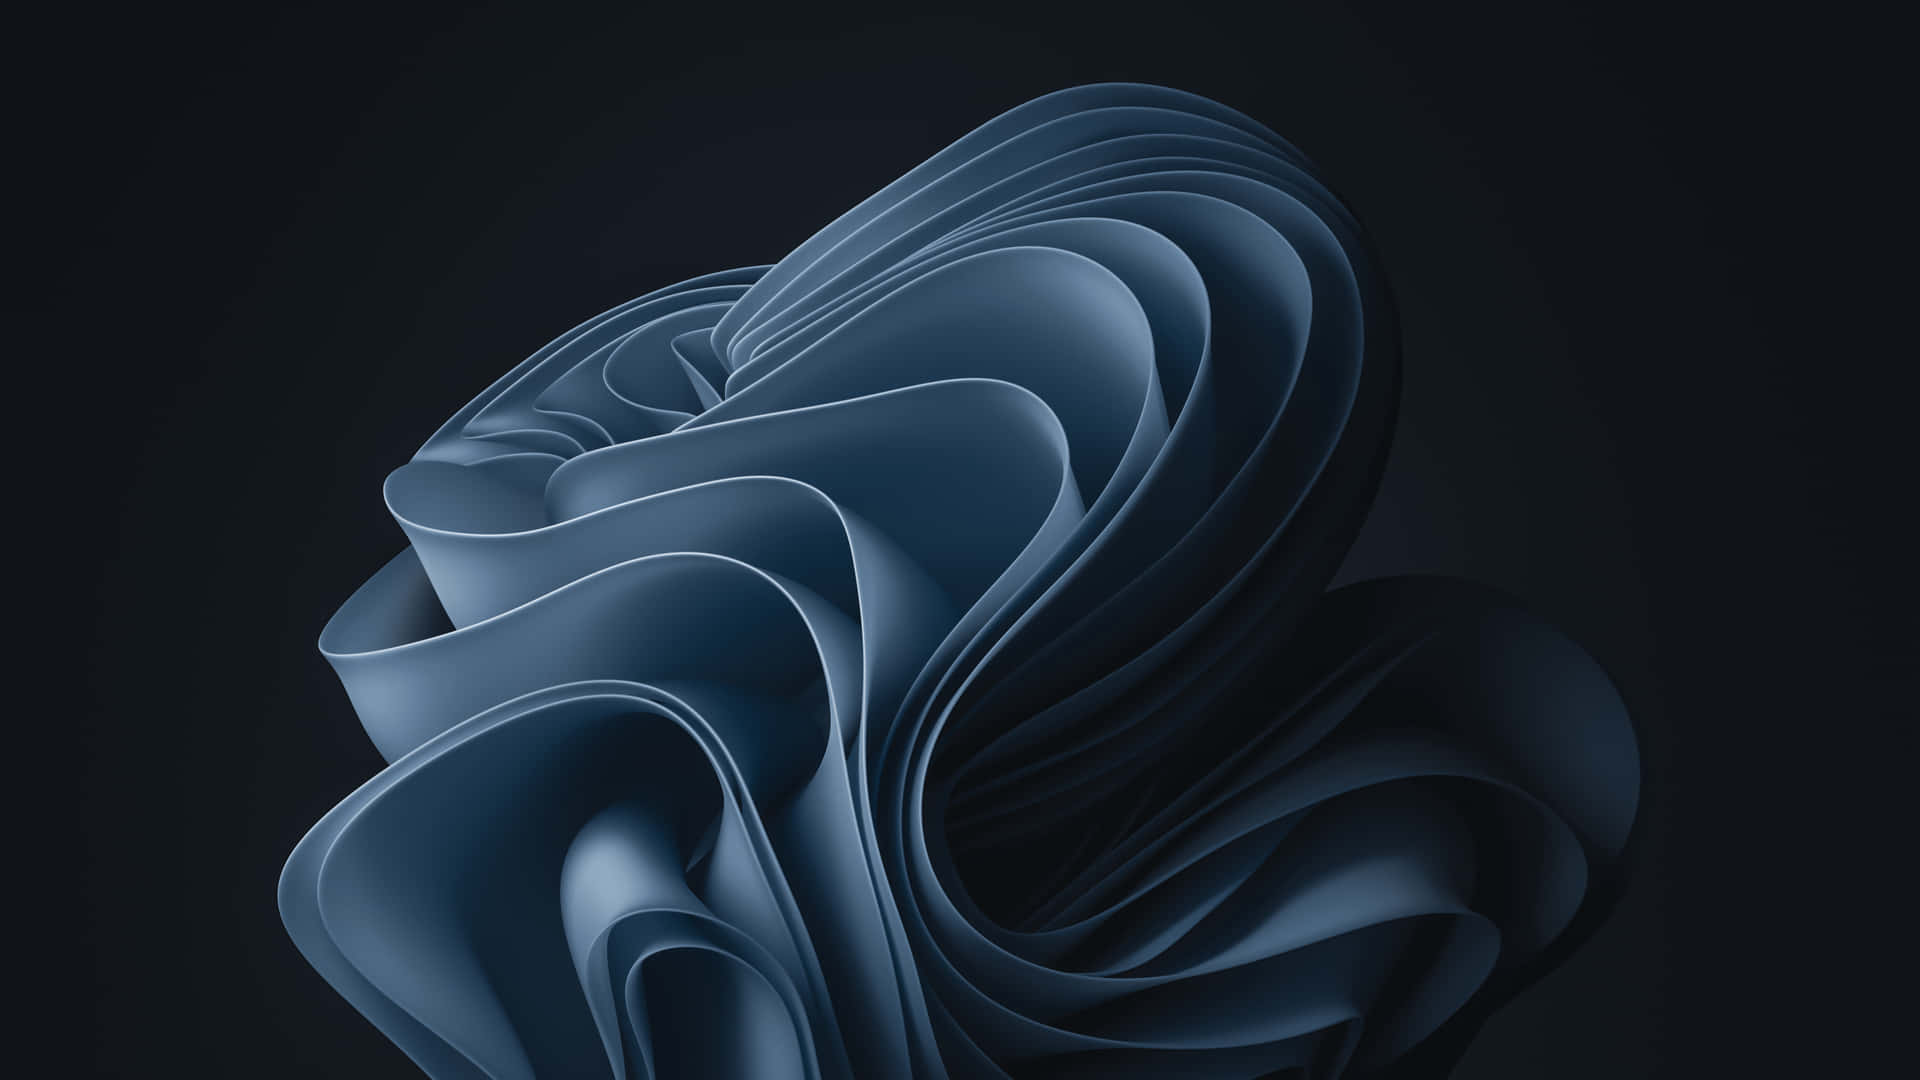 A Blue Abstract Design With A Black Background Wallpaper